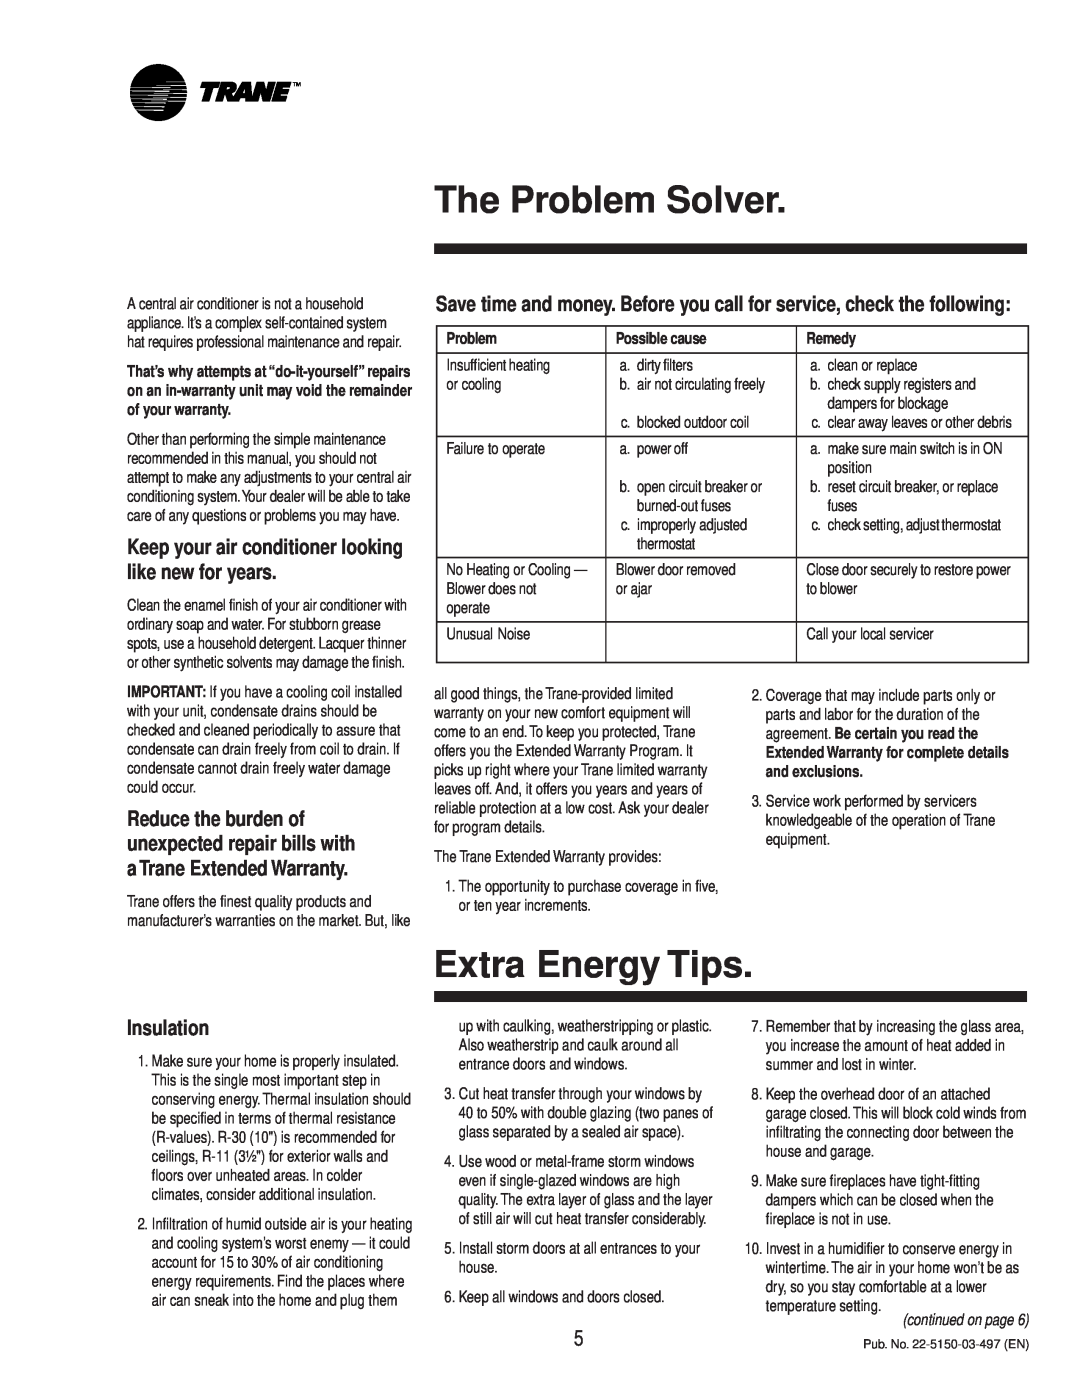 Trane 22-5150-03-497 manual The Problem Solver, Extra Energy Tips, Possible cause, Remedy, continued on page 